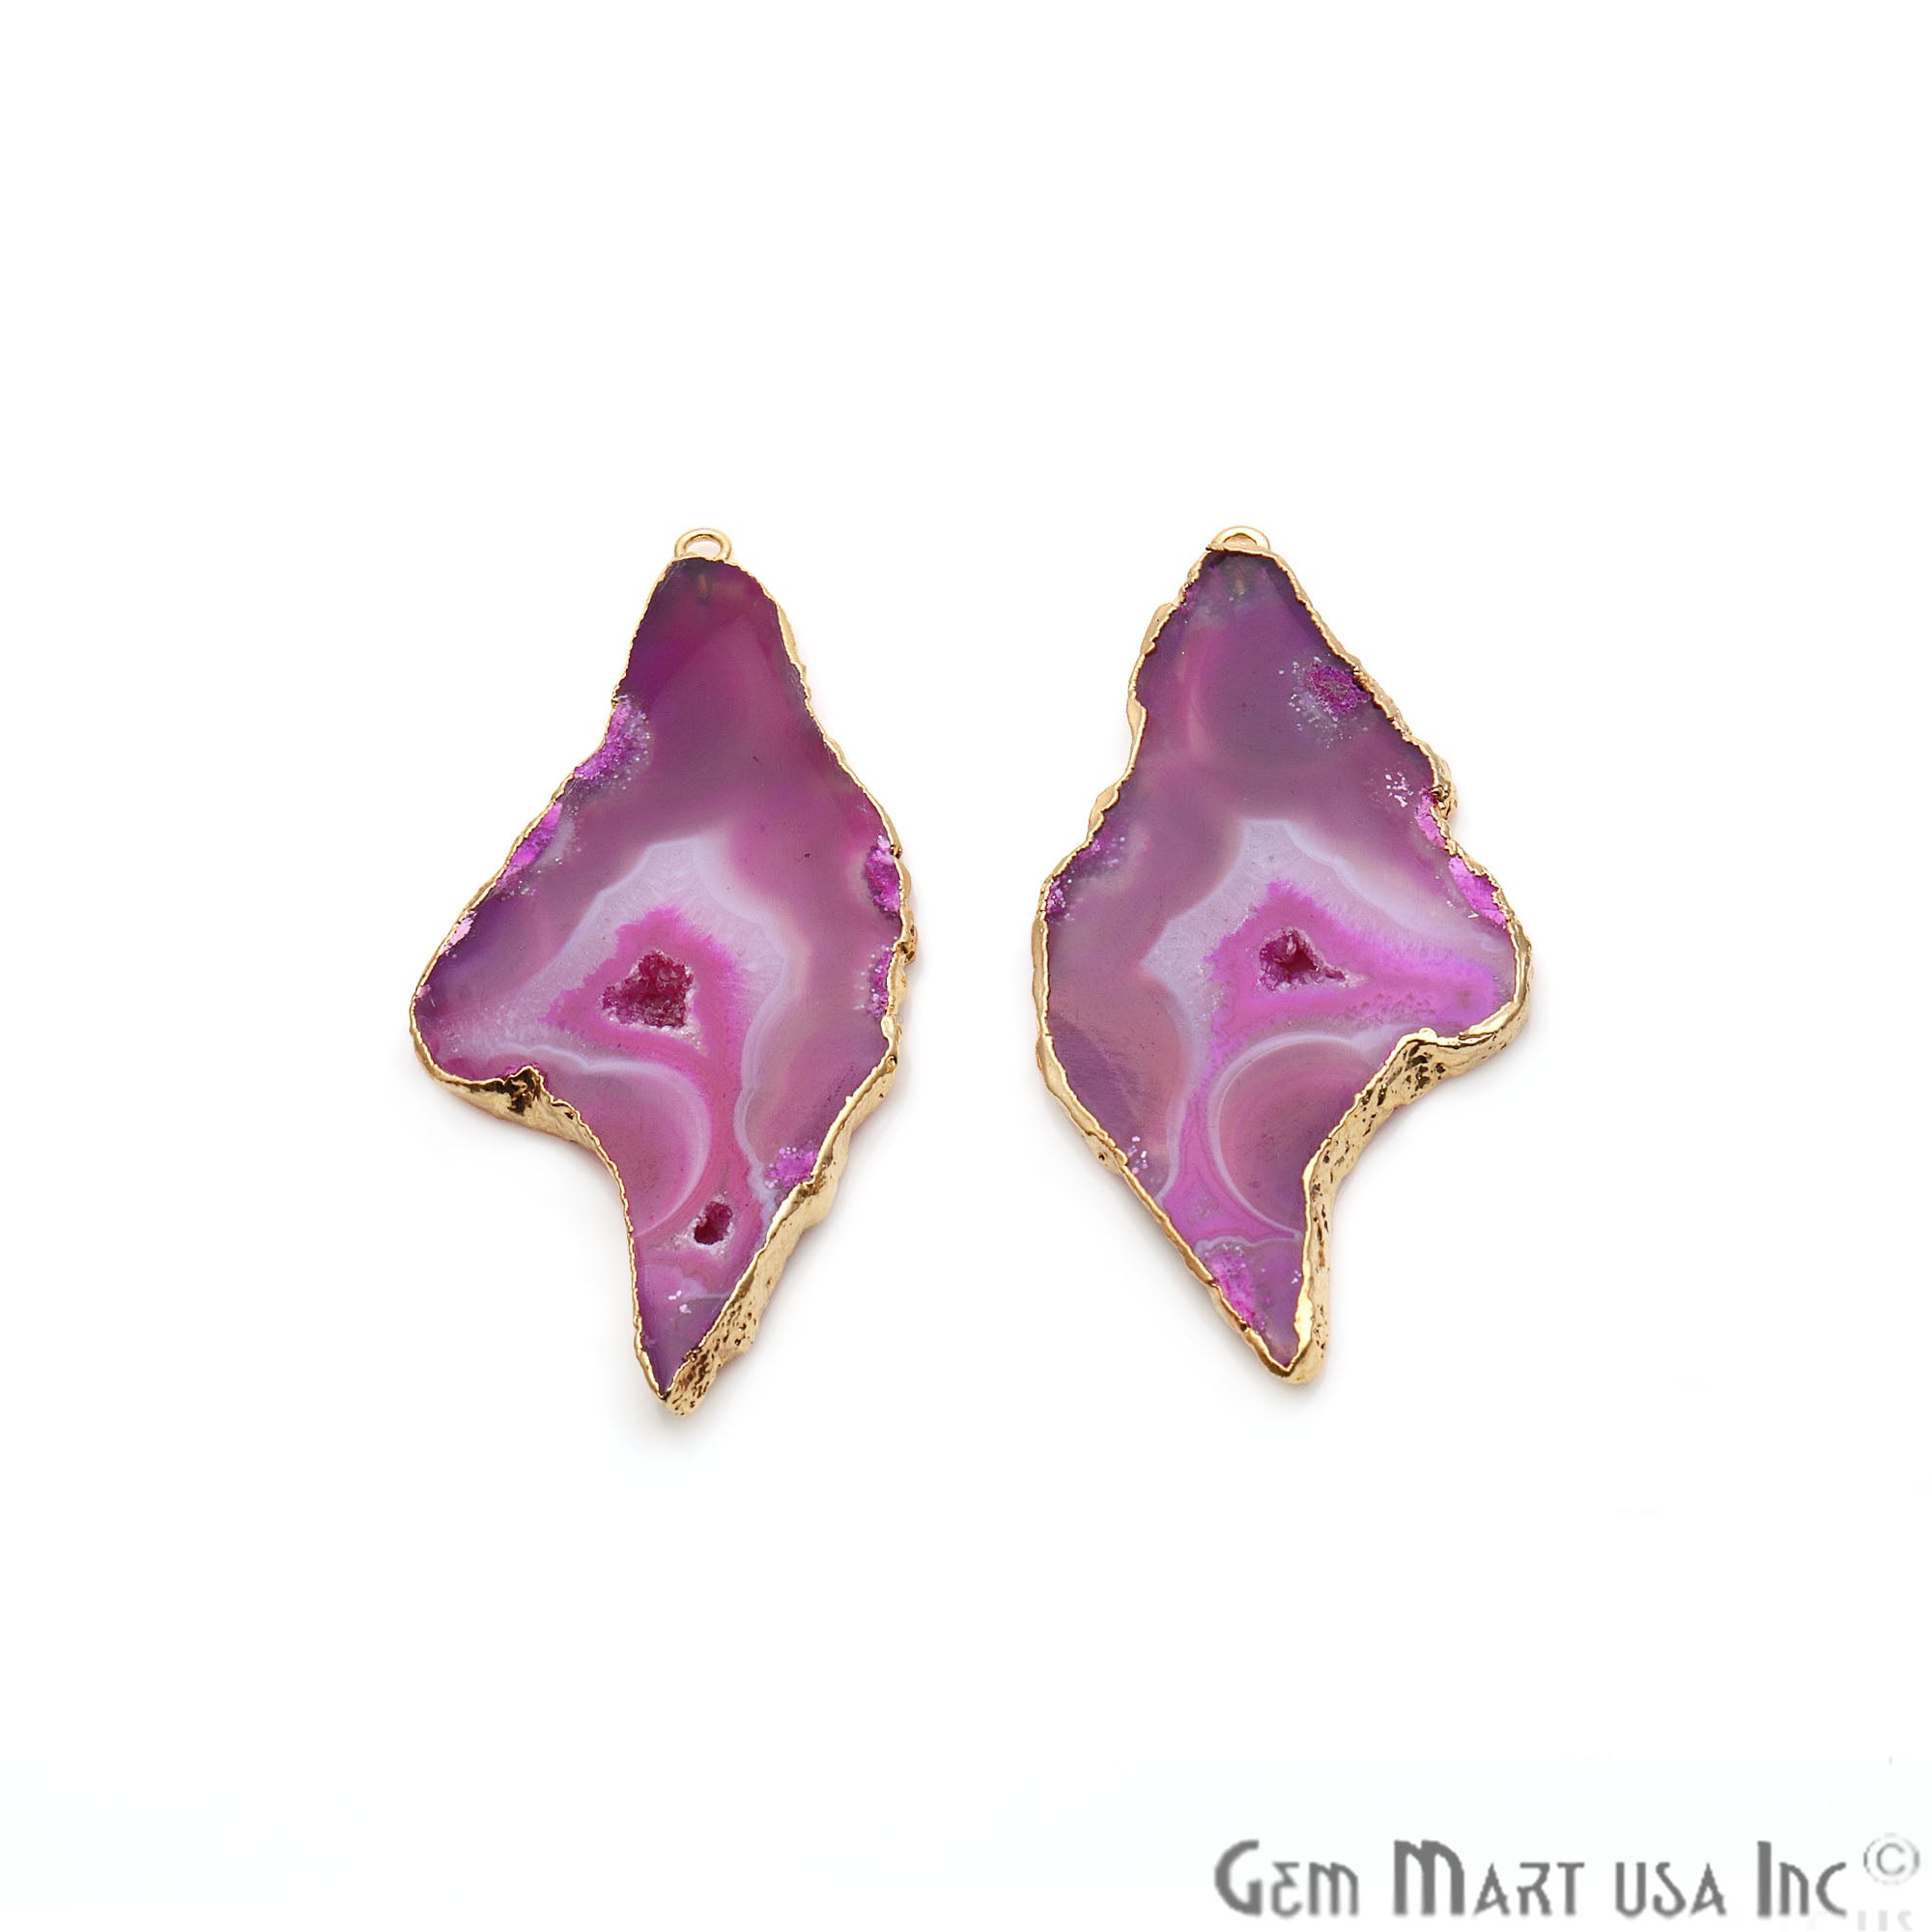 Agate Slice 60x29mm Organic Gold Electroplated Gemstone Earring Connector 1 Pair - GemMartUSA